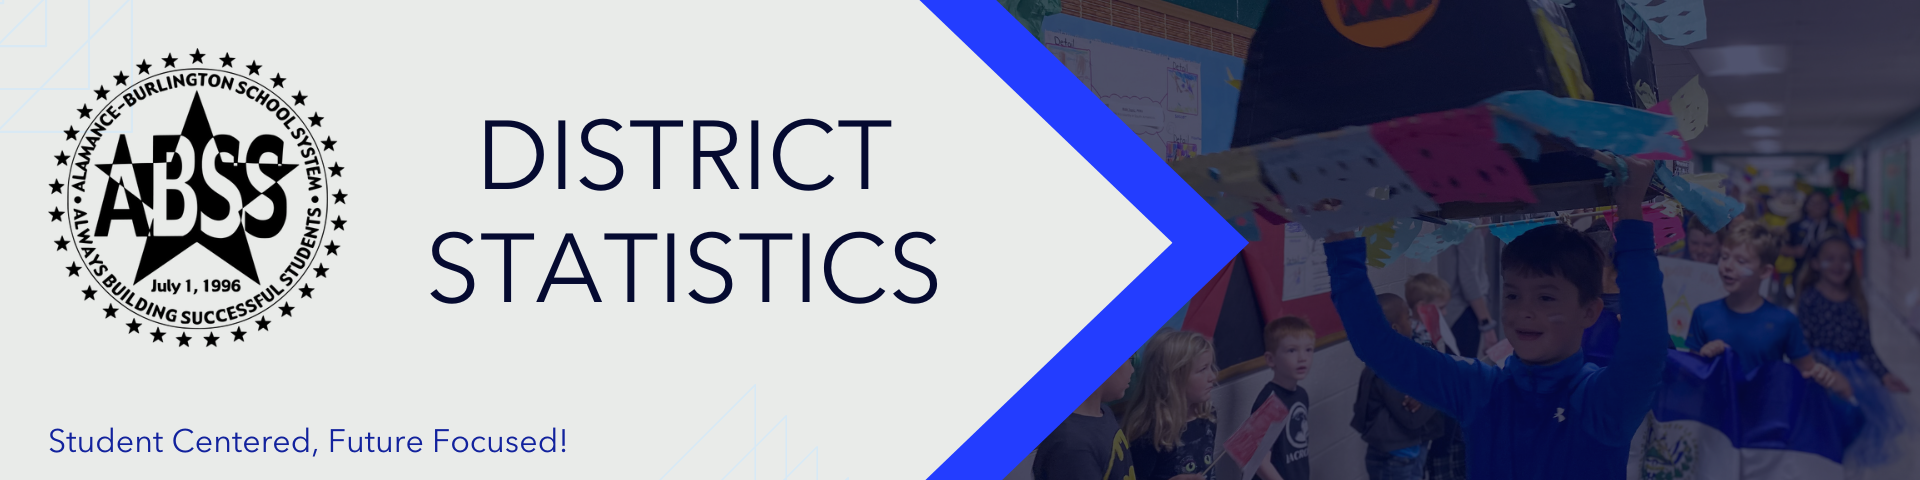 A header image with the text "District Statistics" and the Alamance-Burlington School System logo and phrase "Student centered, future focused!"  There is an image of school children participating in a school Hispanic Heritage parade on the right side.